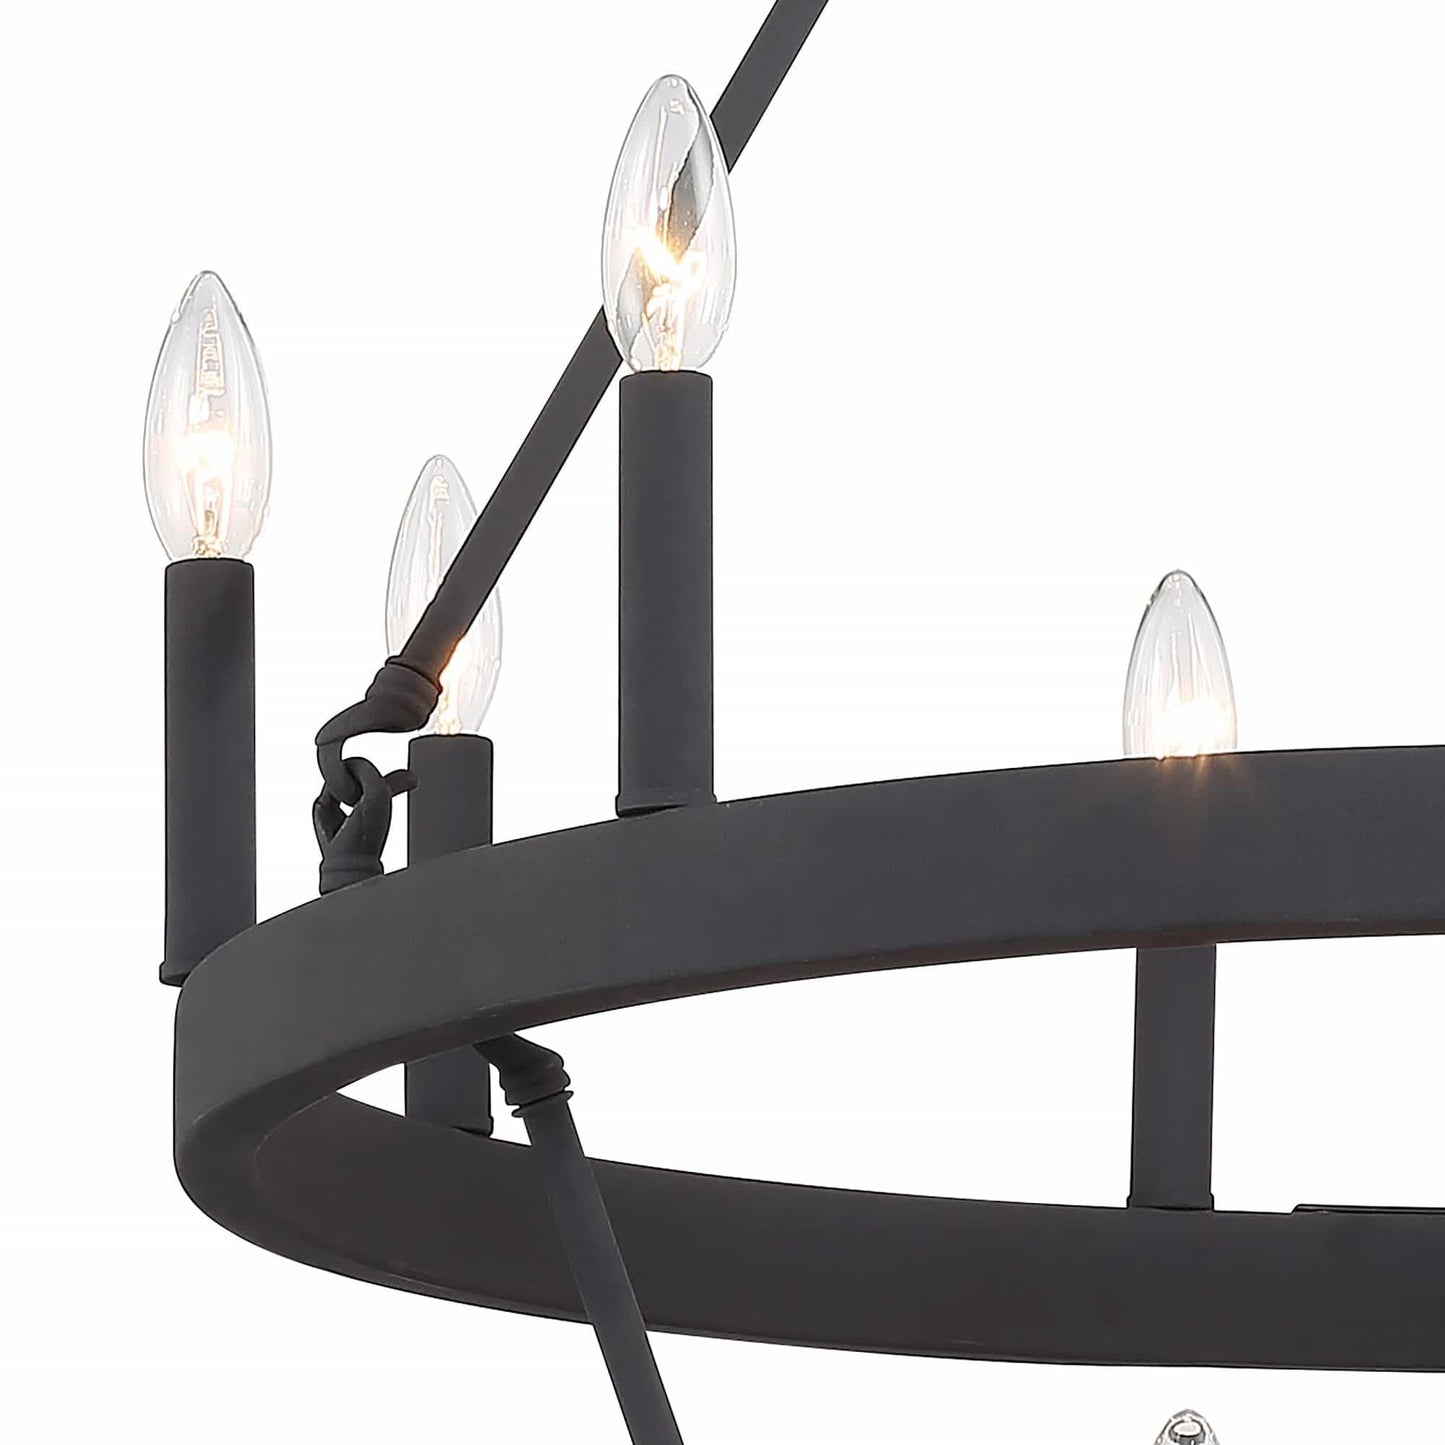 15 light candle style wagon wheel entry chandelier (6) by ACROMA